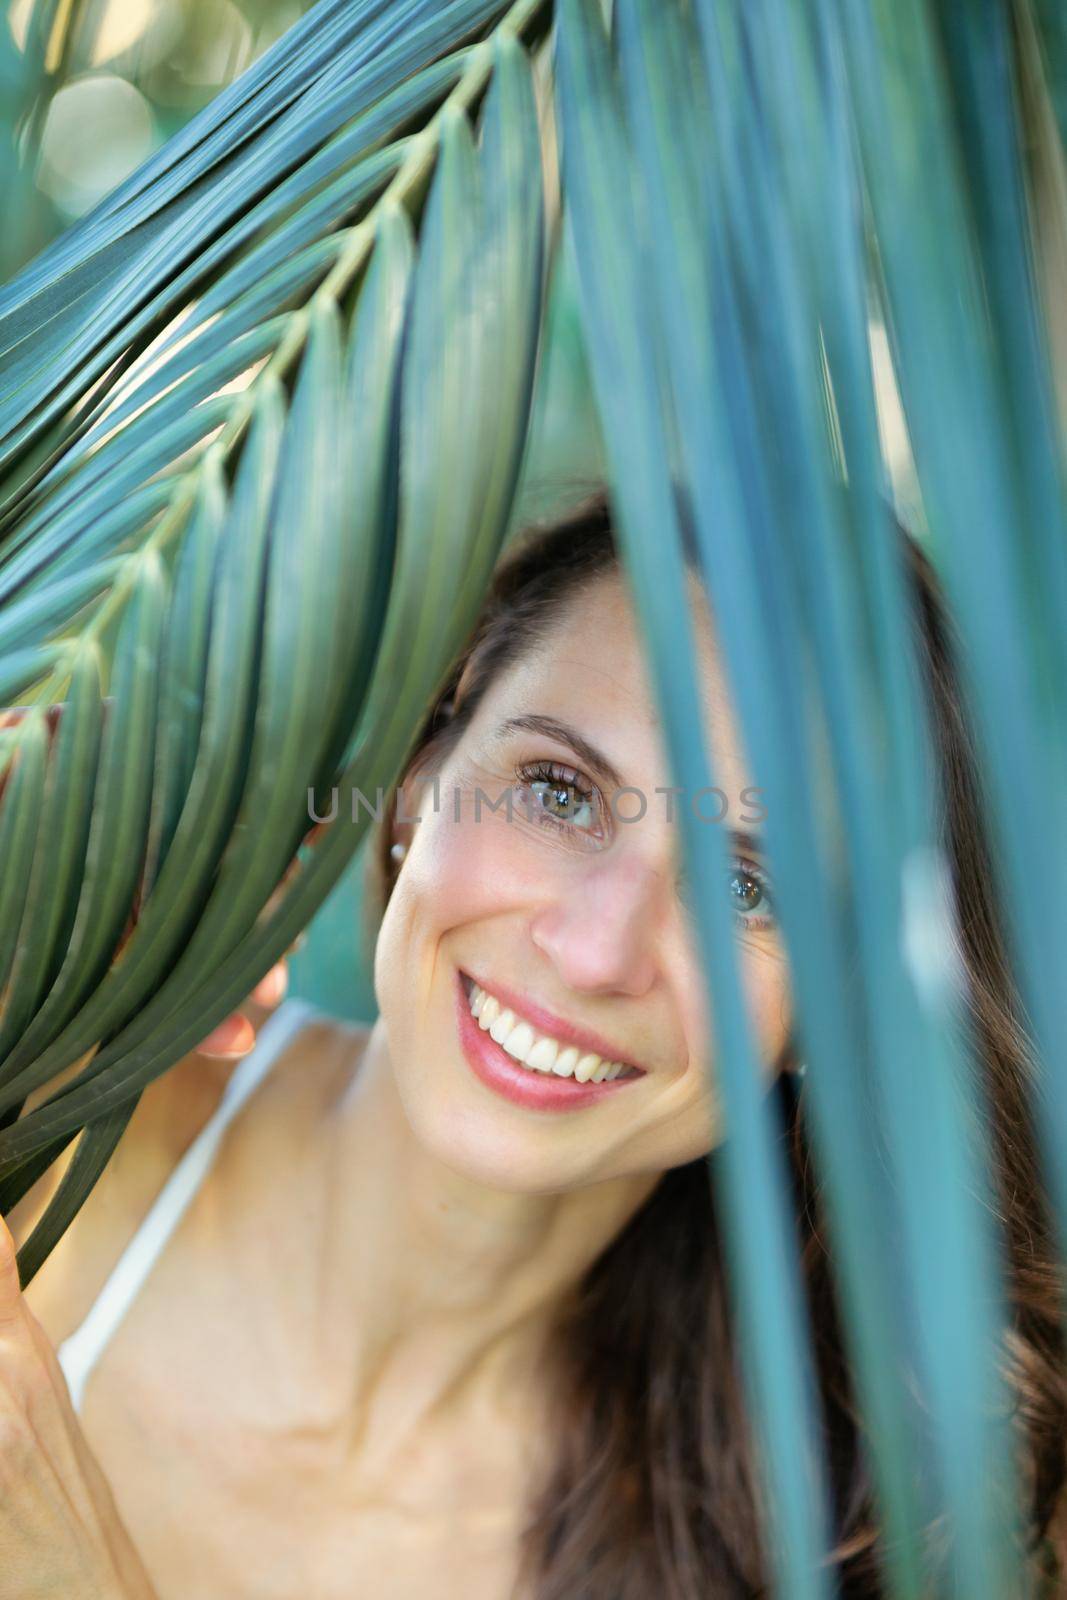 Young beautiful natural cheerful woman with healthy face and skin in exotic greenery. Closeup fresh face of attractive girl. Summer model. Natural beauty concept.